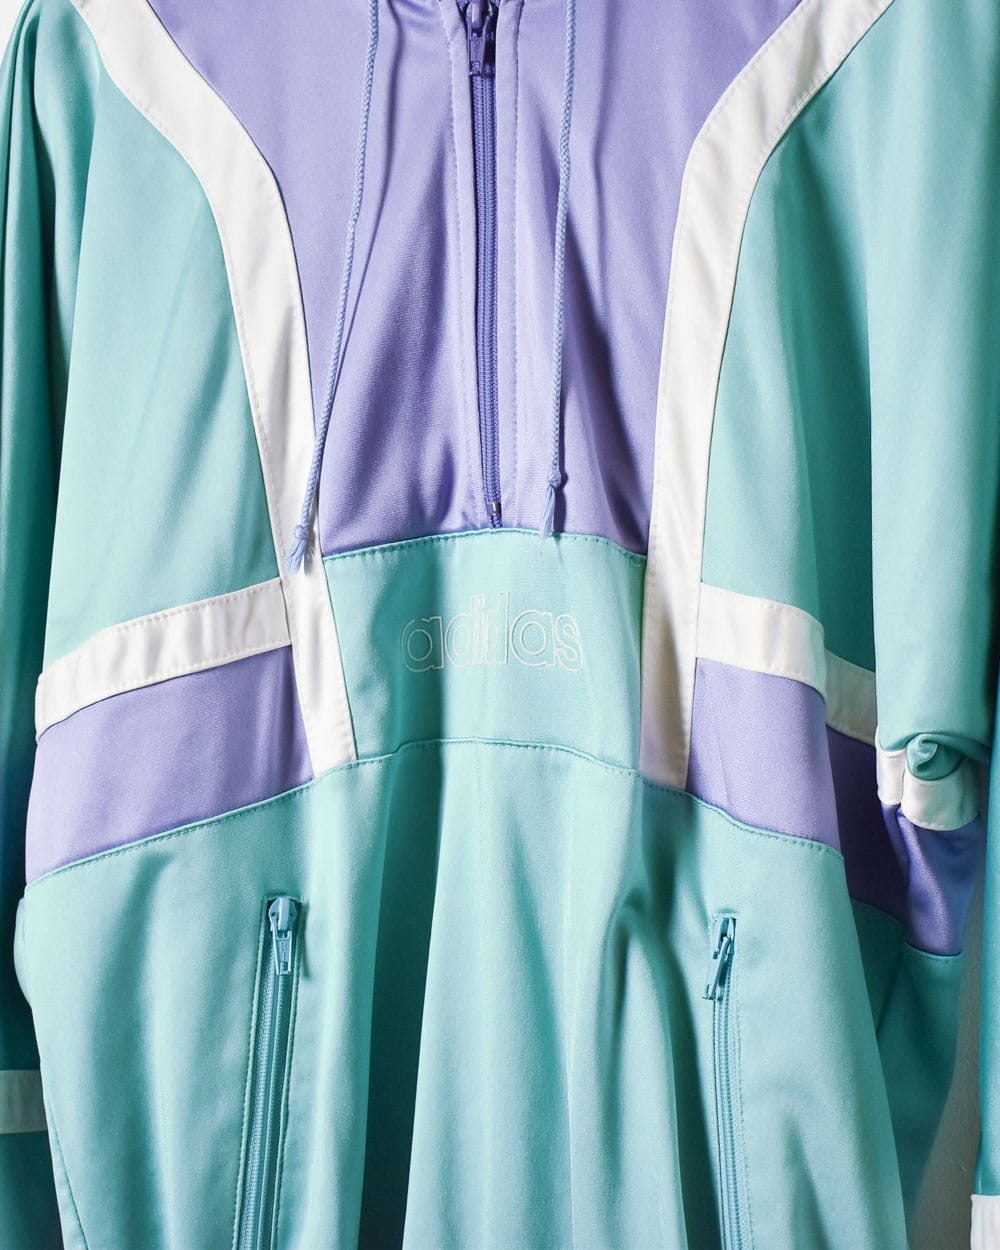 BabyBlue Adidas Hooded 1/4 Zip Tracksuit Top - Small